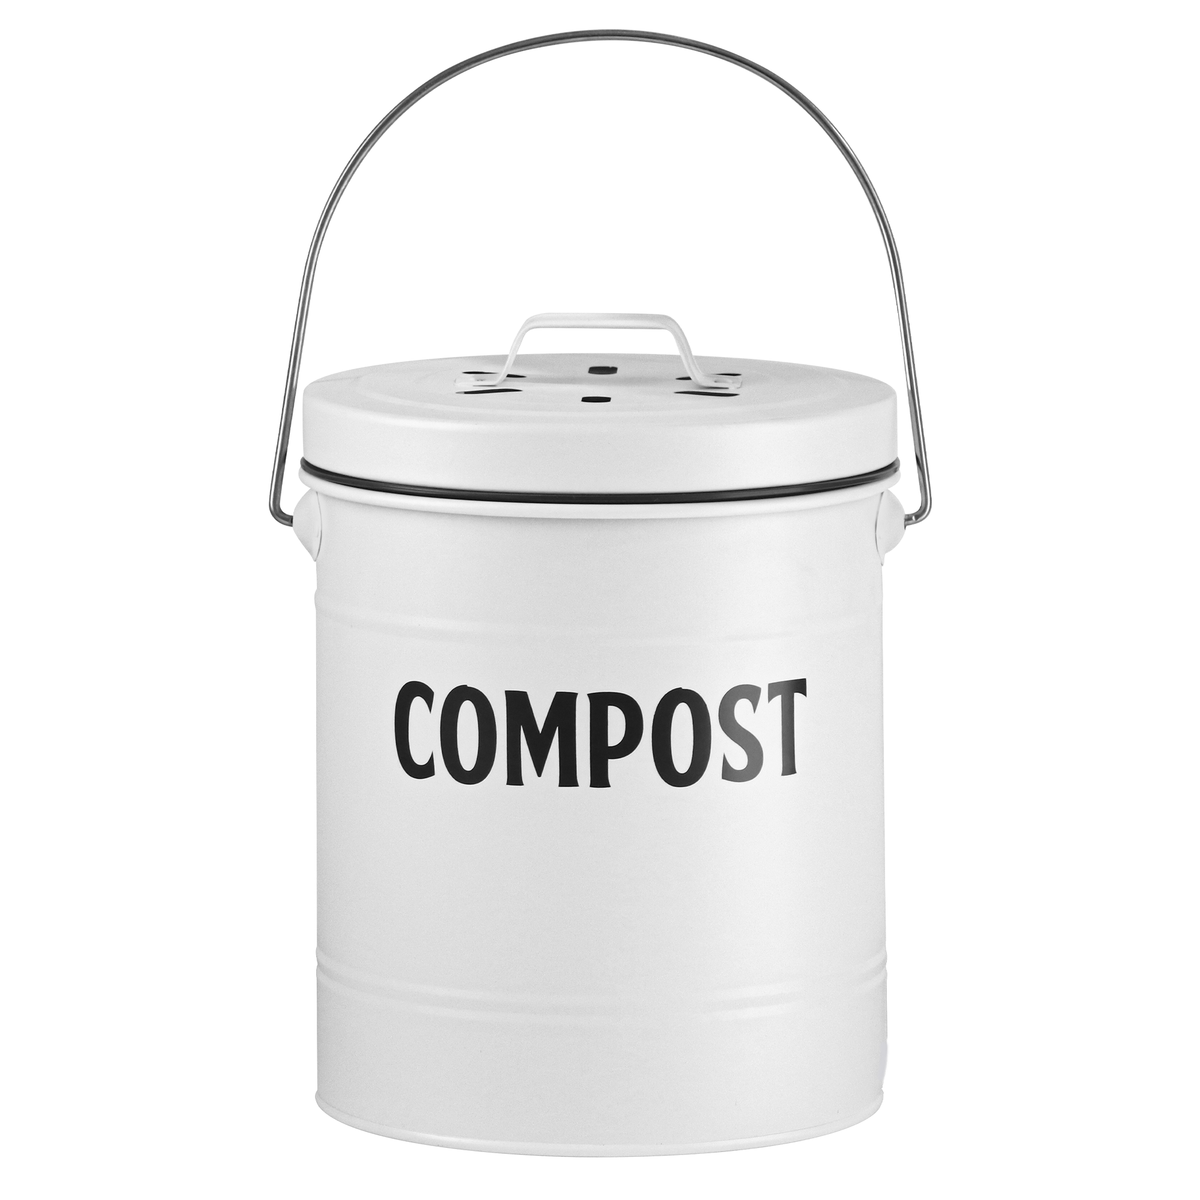 Compost Bin for Kitchen Counter by Saratoga Home - Family Sized, White